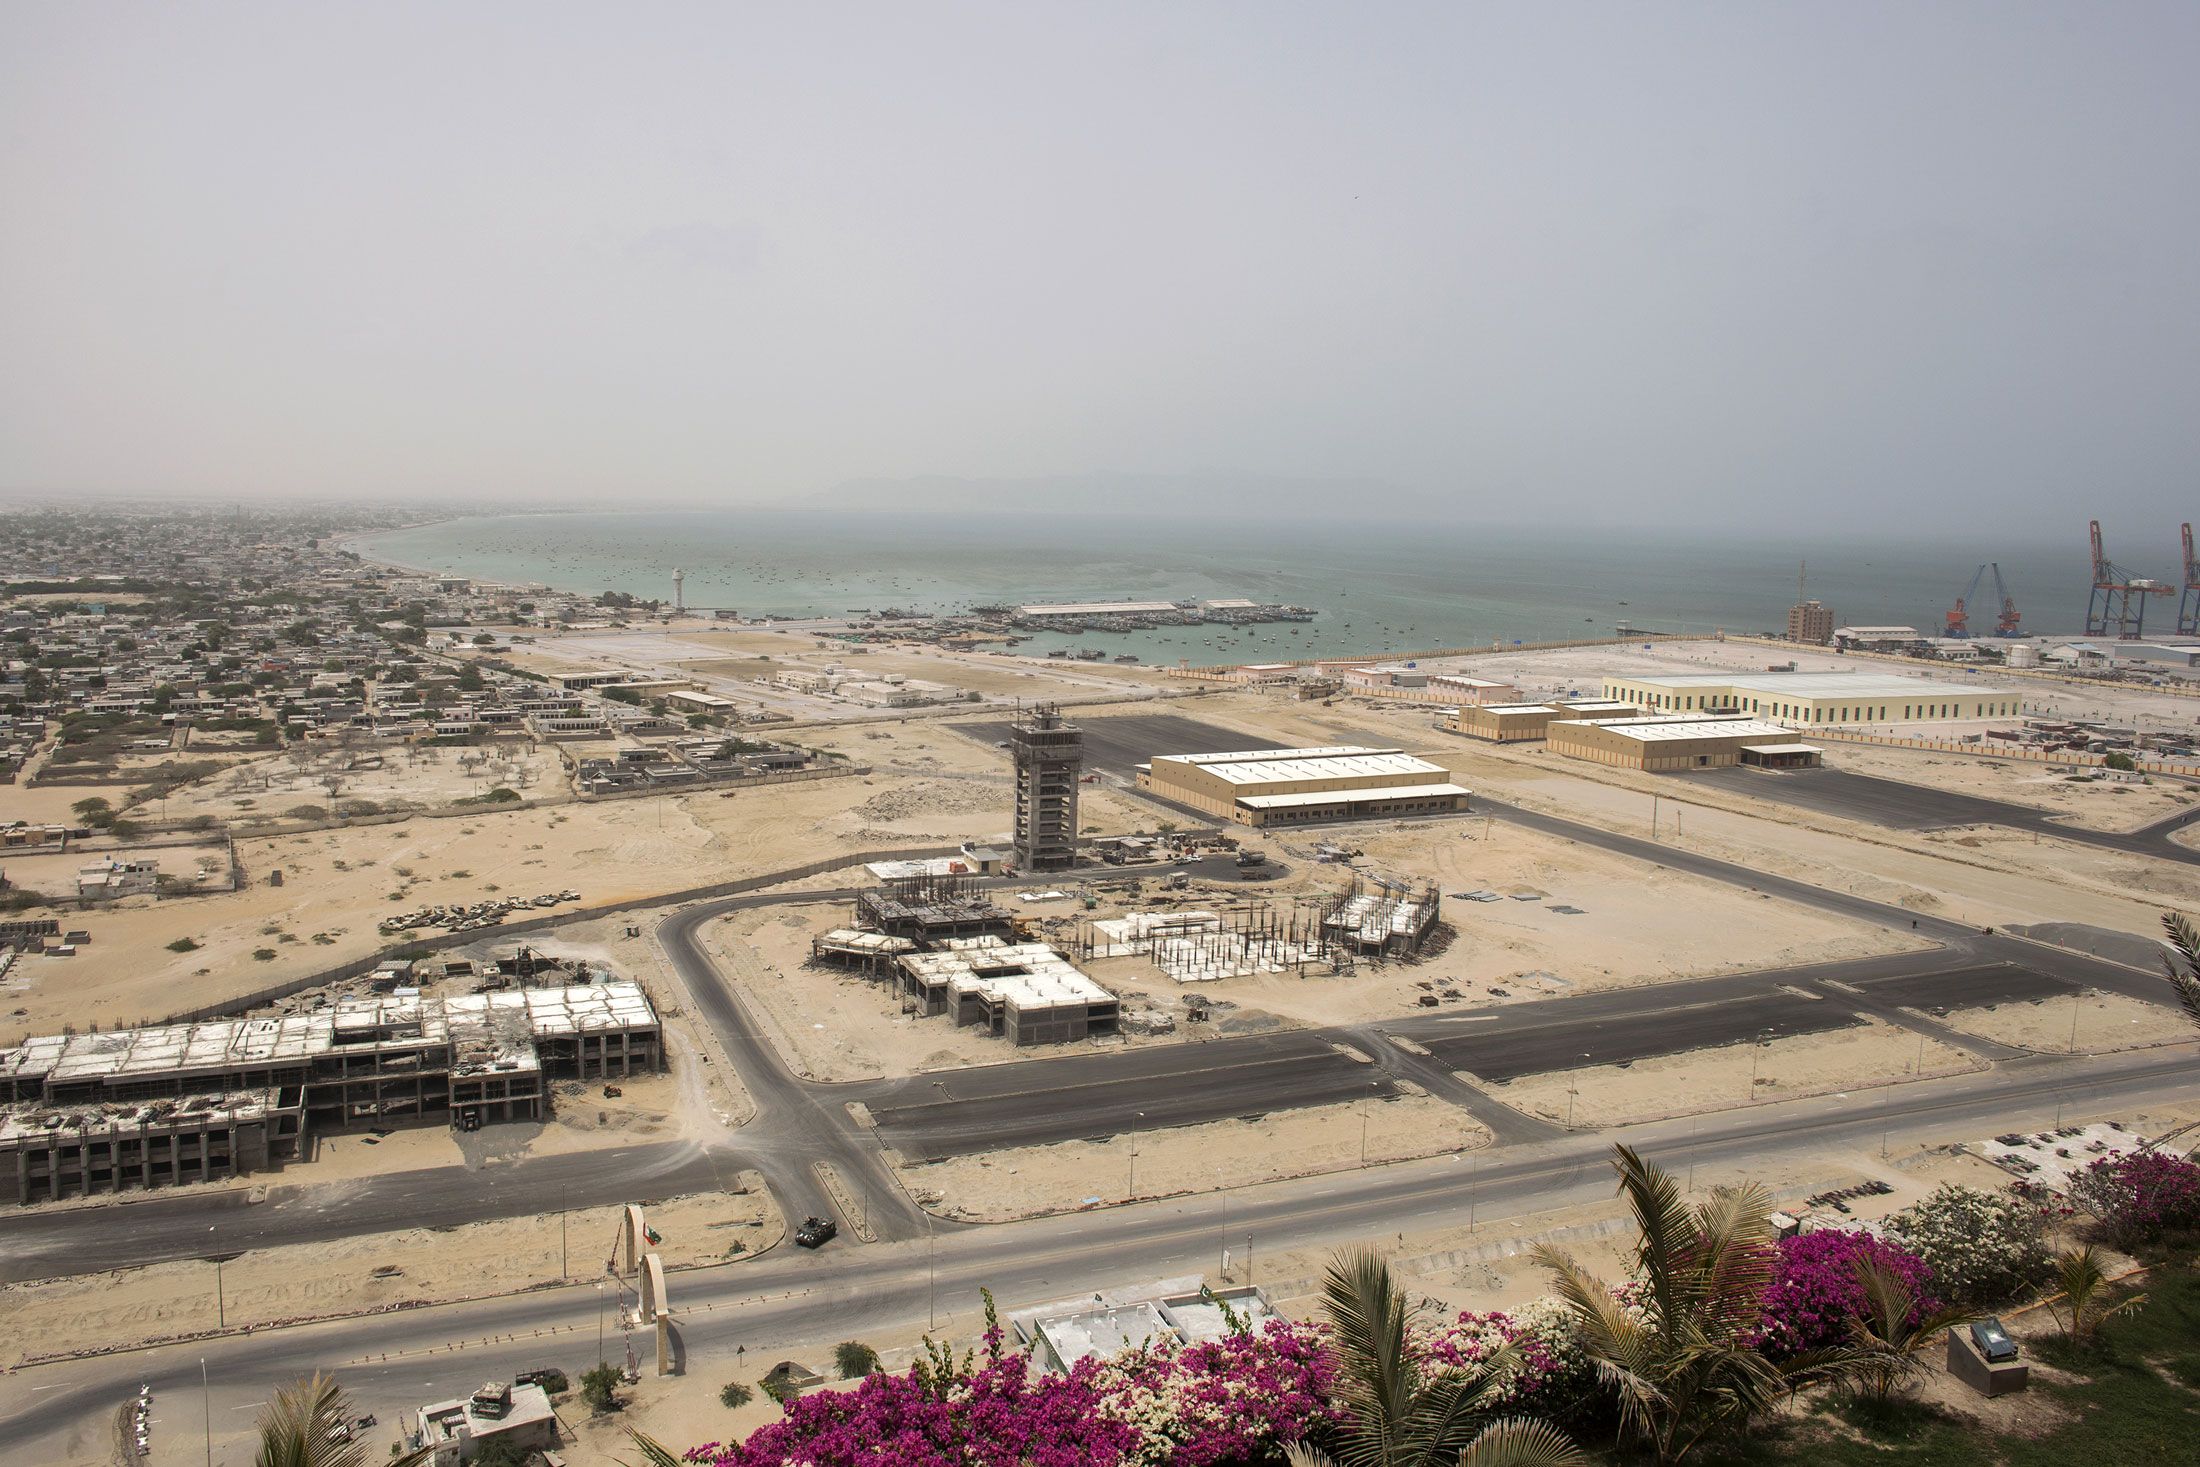 A development site near Gwadar Port, operated by China Overseas Ports Holding Co., in July 2018. Photographer: Asim Hafeez/Bloomberg